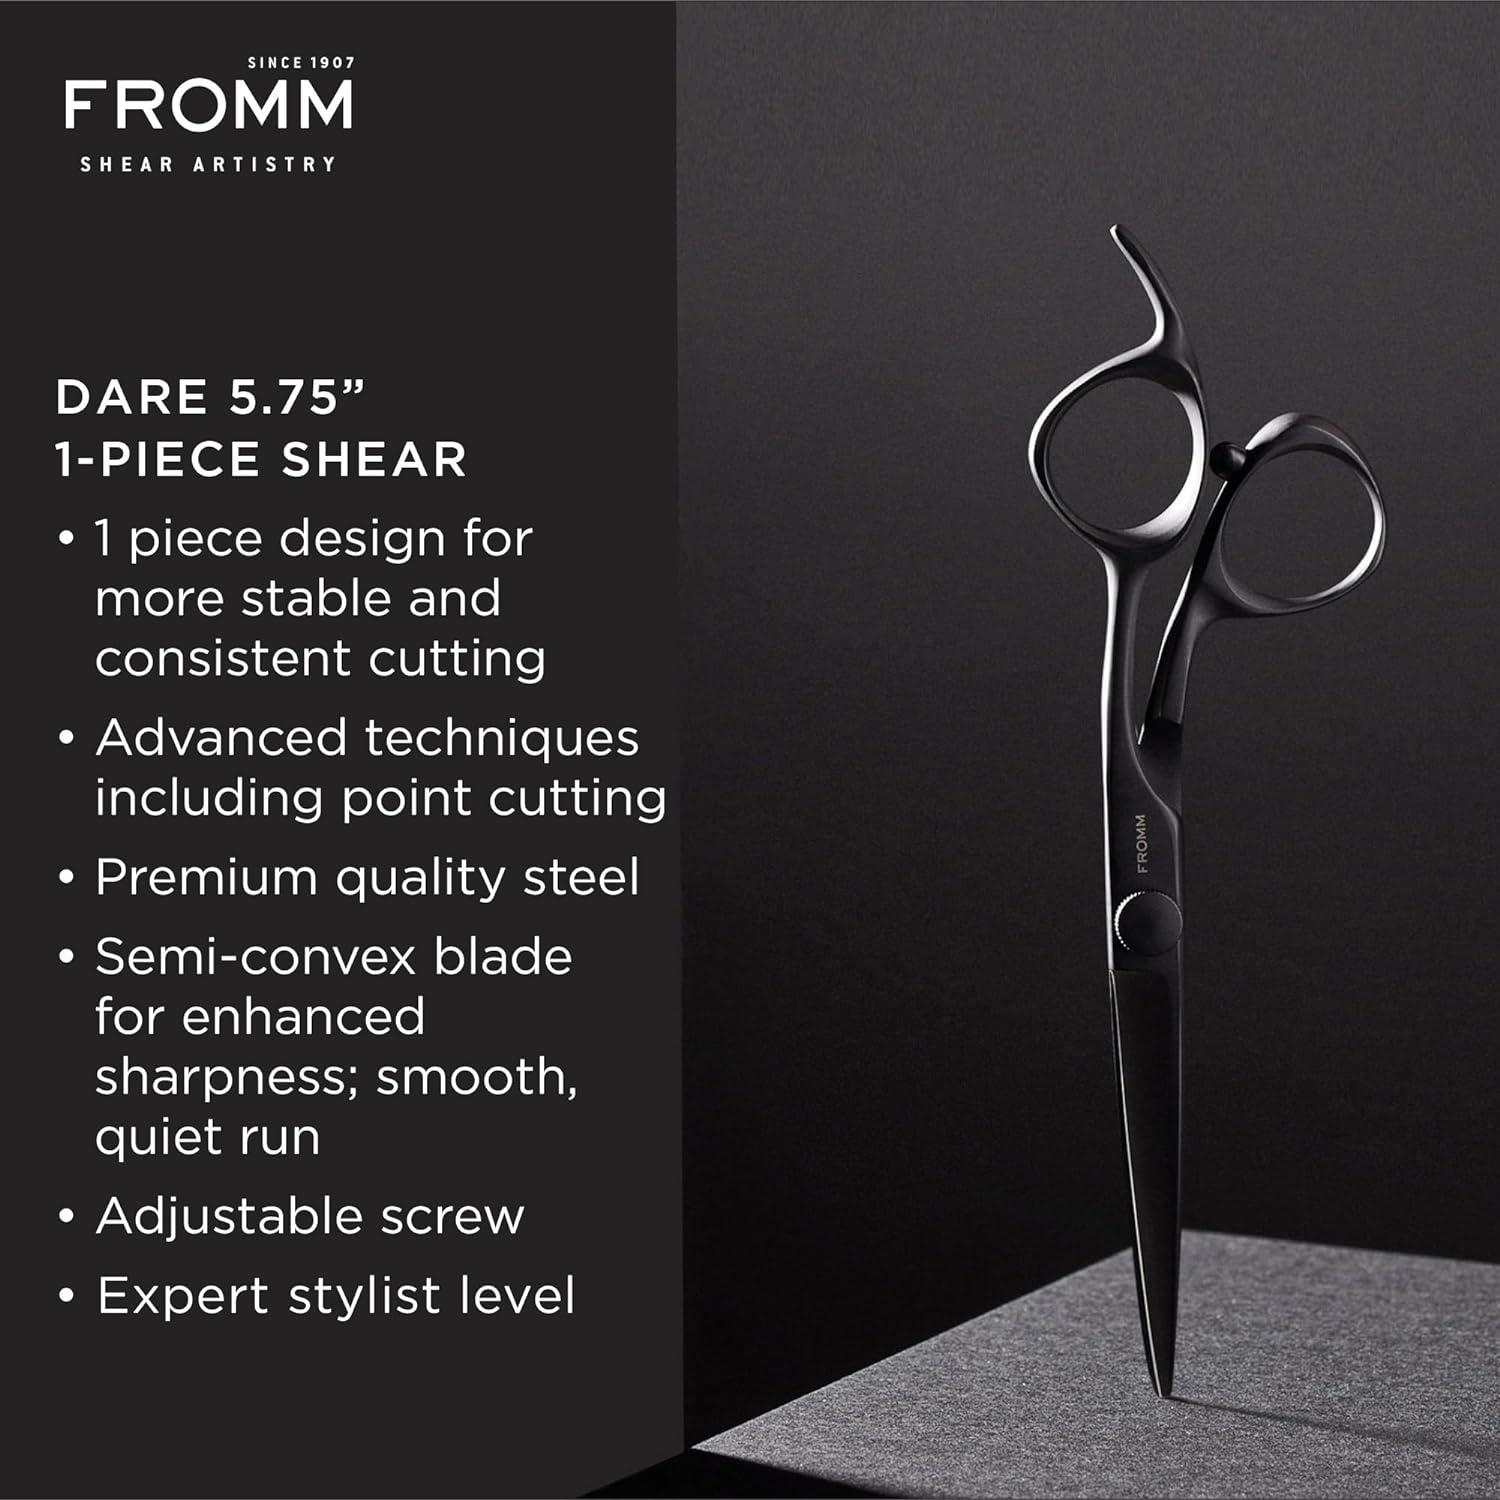 Fromm Professional Dare 5.75" 1-Piece Precision Slide & Point Hair Cutting Shears in Matte Black Japanese Steel Scissors with Semi-Convex Blade for Expert Salon Stylists